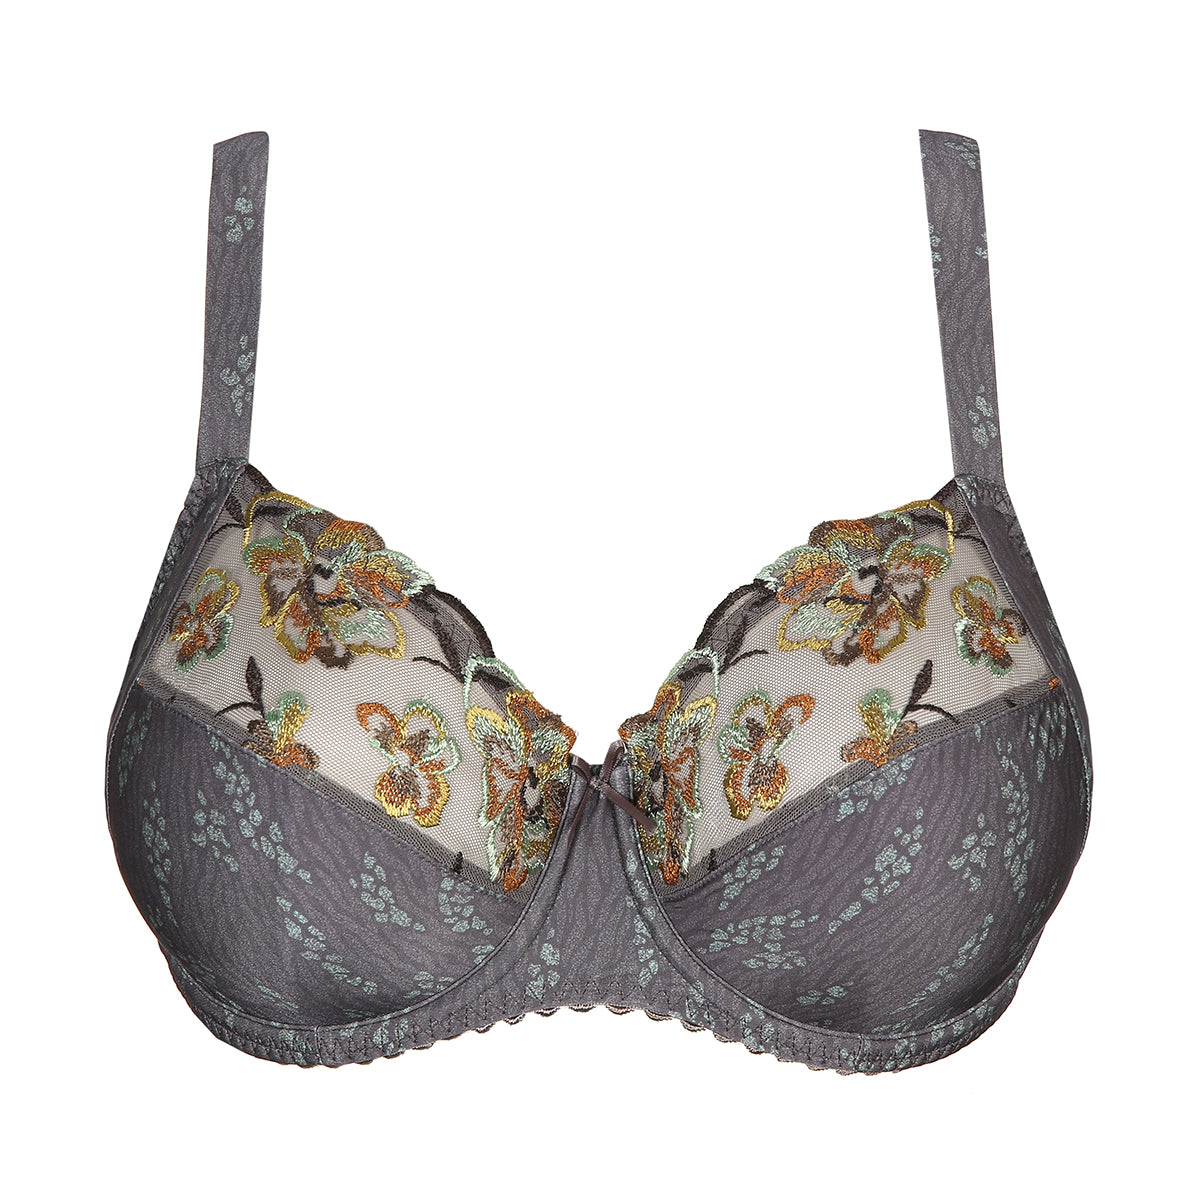 PrimaDonna DEAUVILLE Amour full cup bra